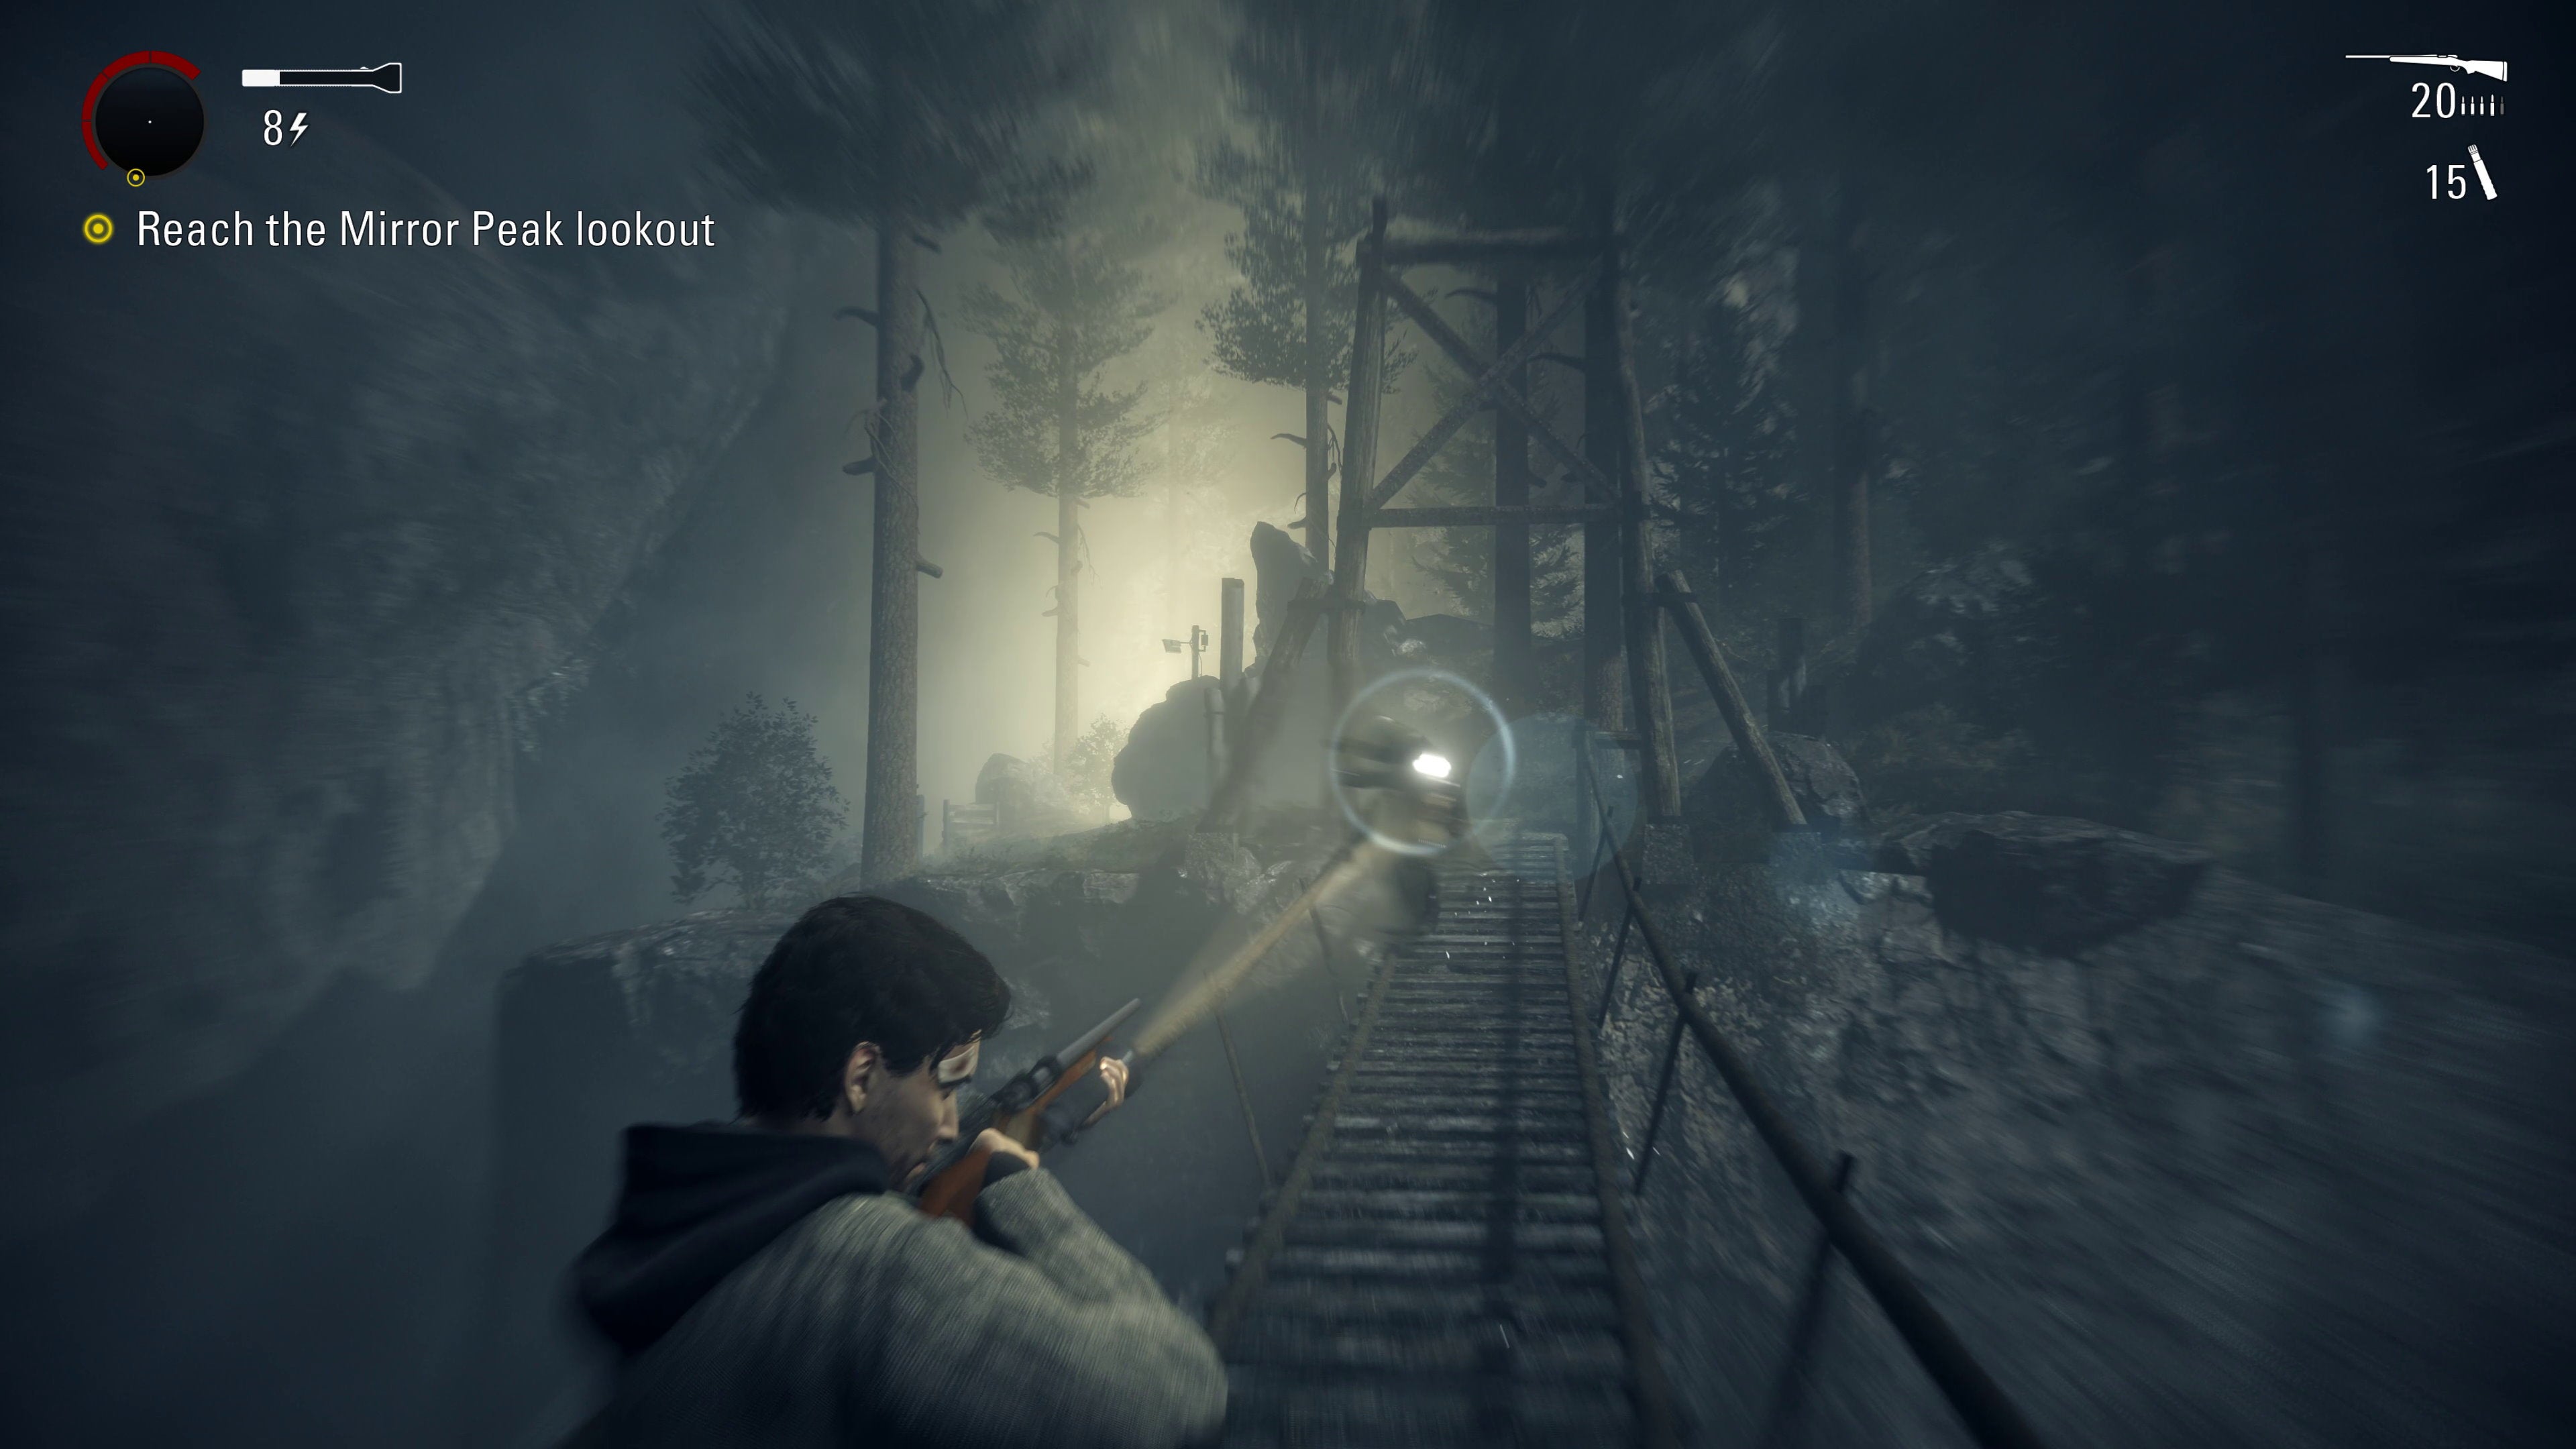 Alan aims a torch at a possessed man on a bridge from Alan Wake Remastered